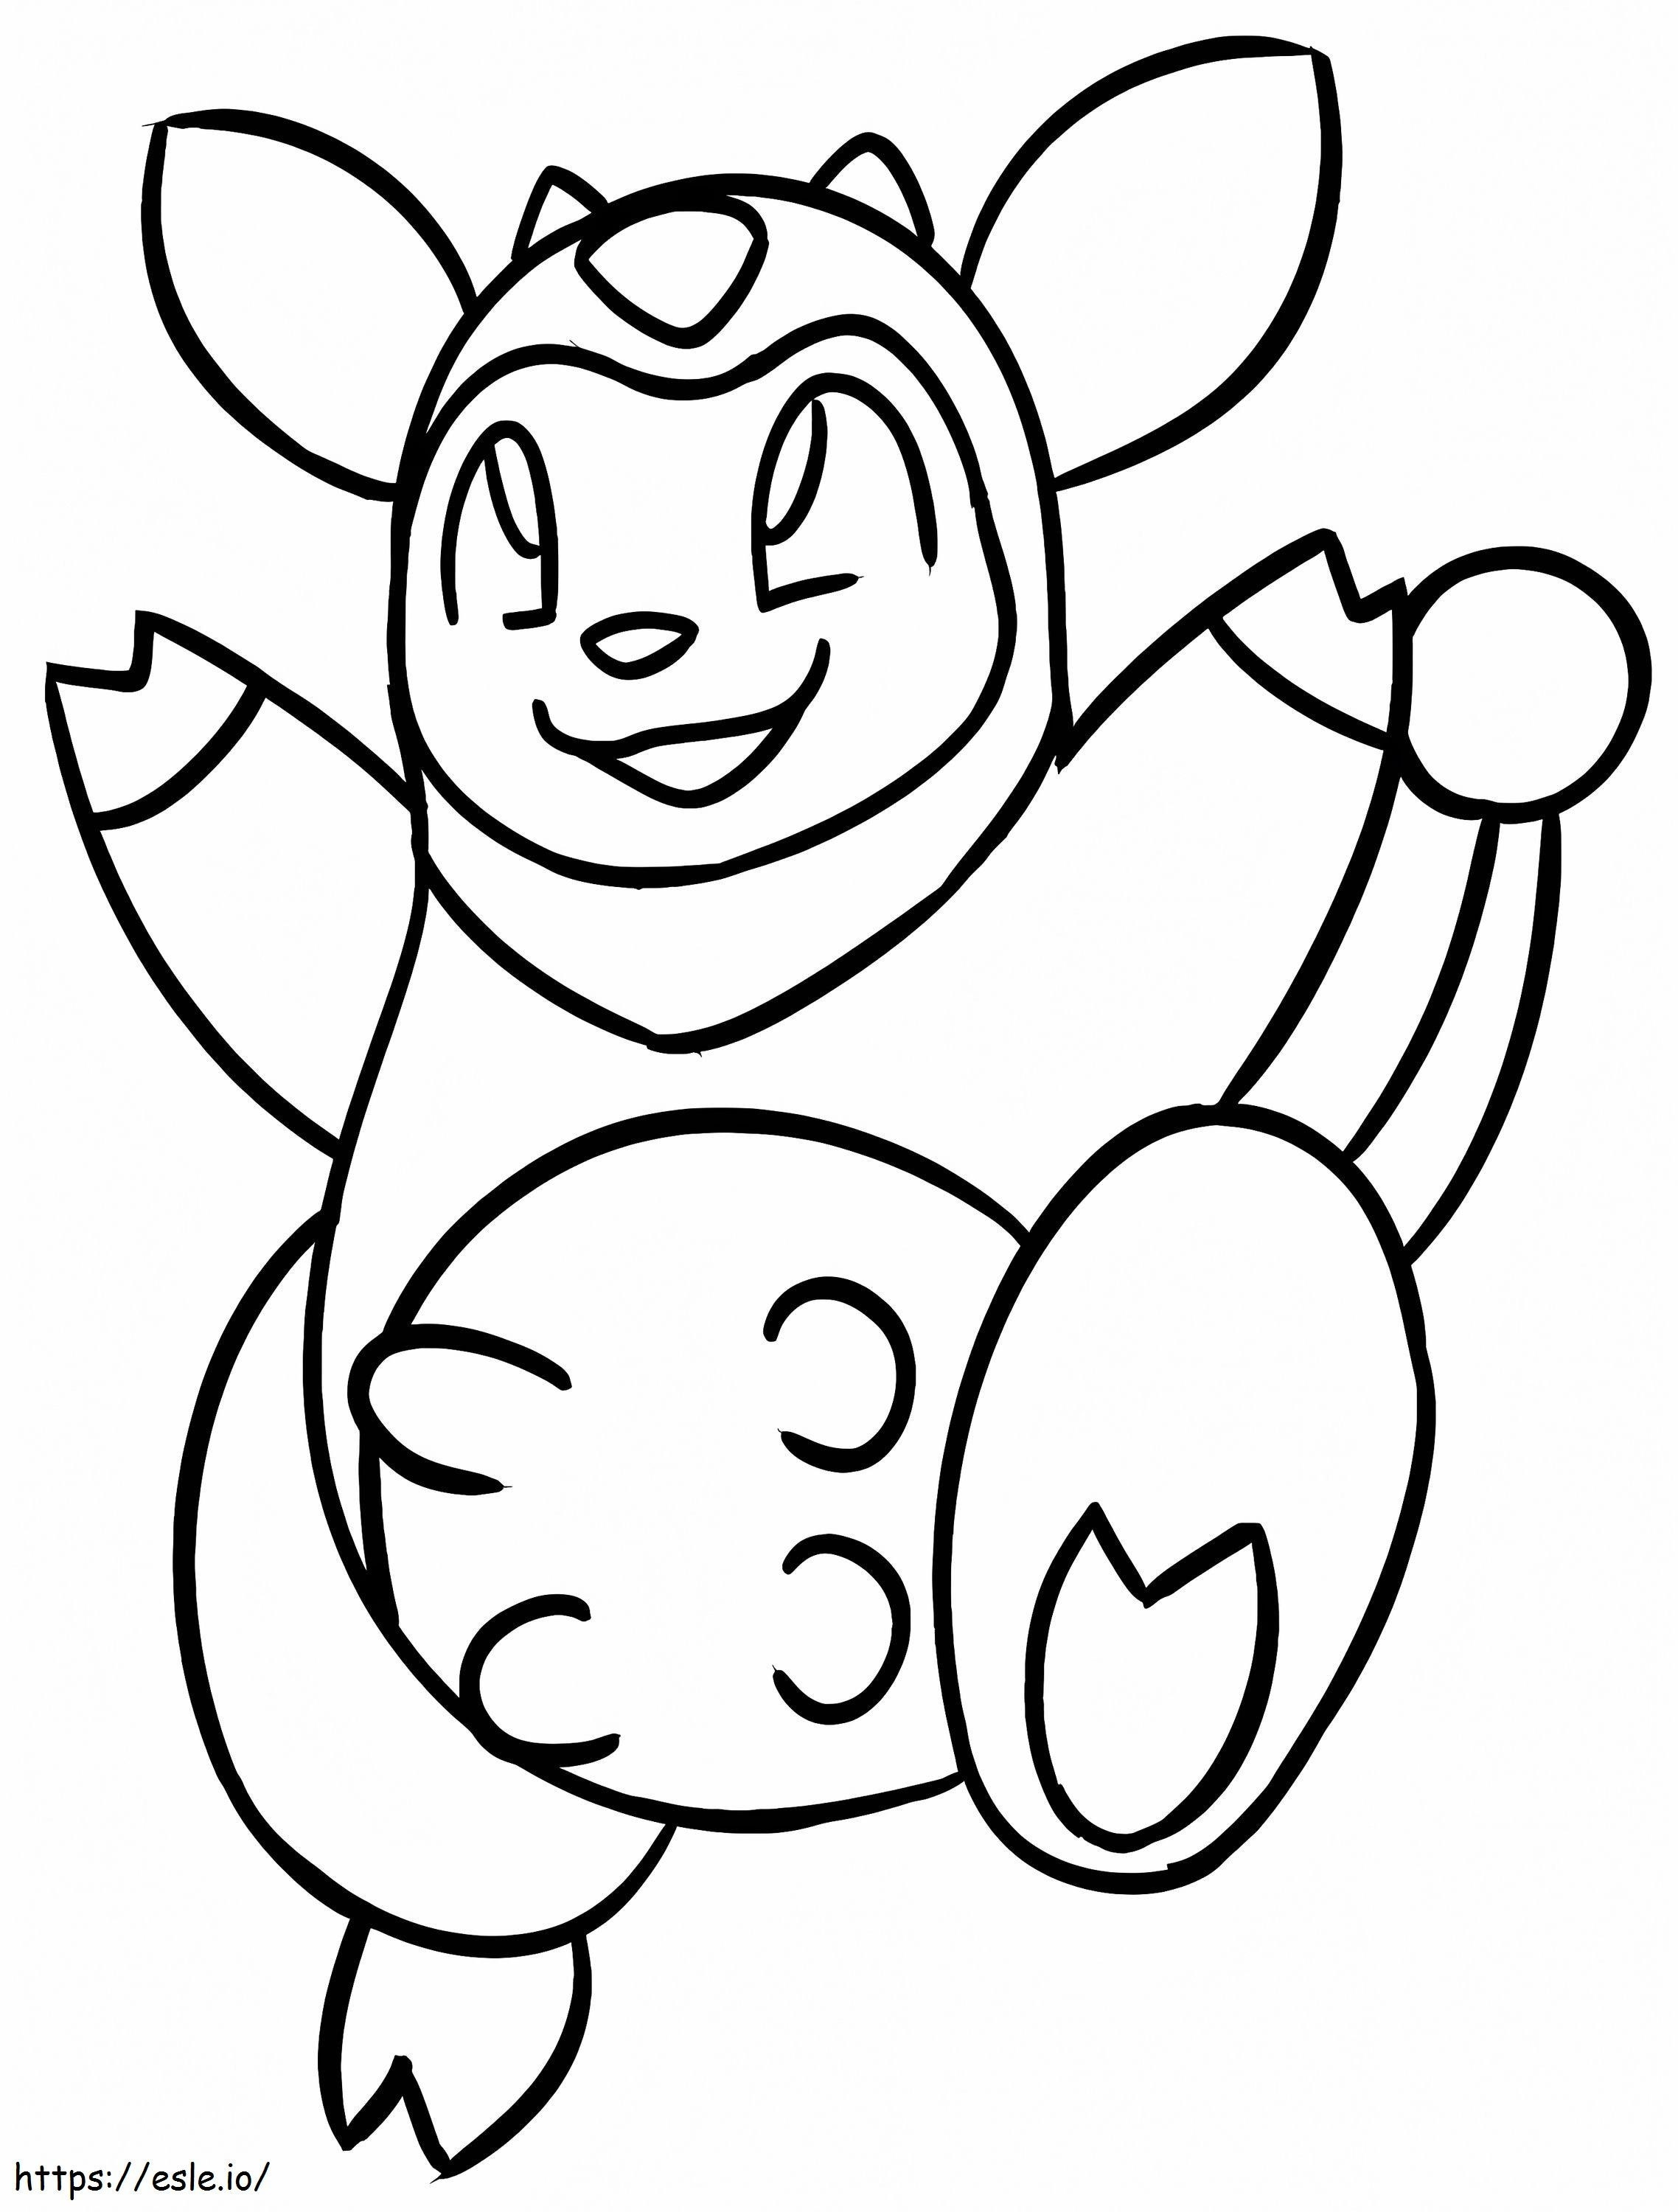 Adorable Miltank coloring page